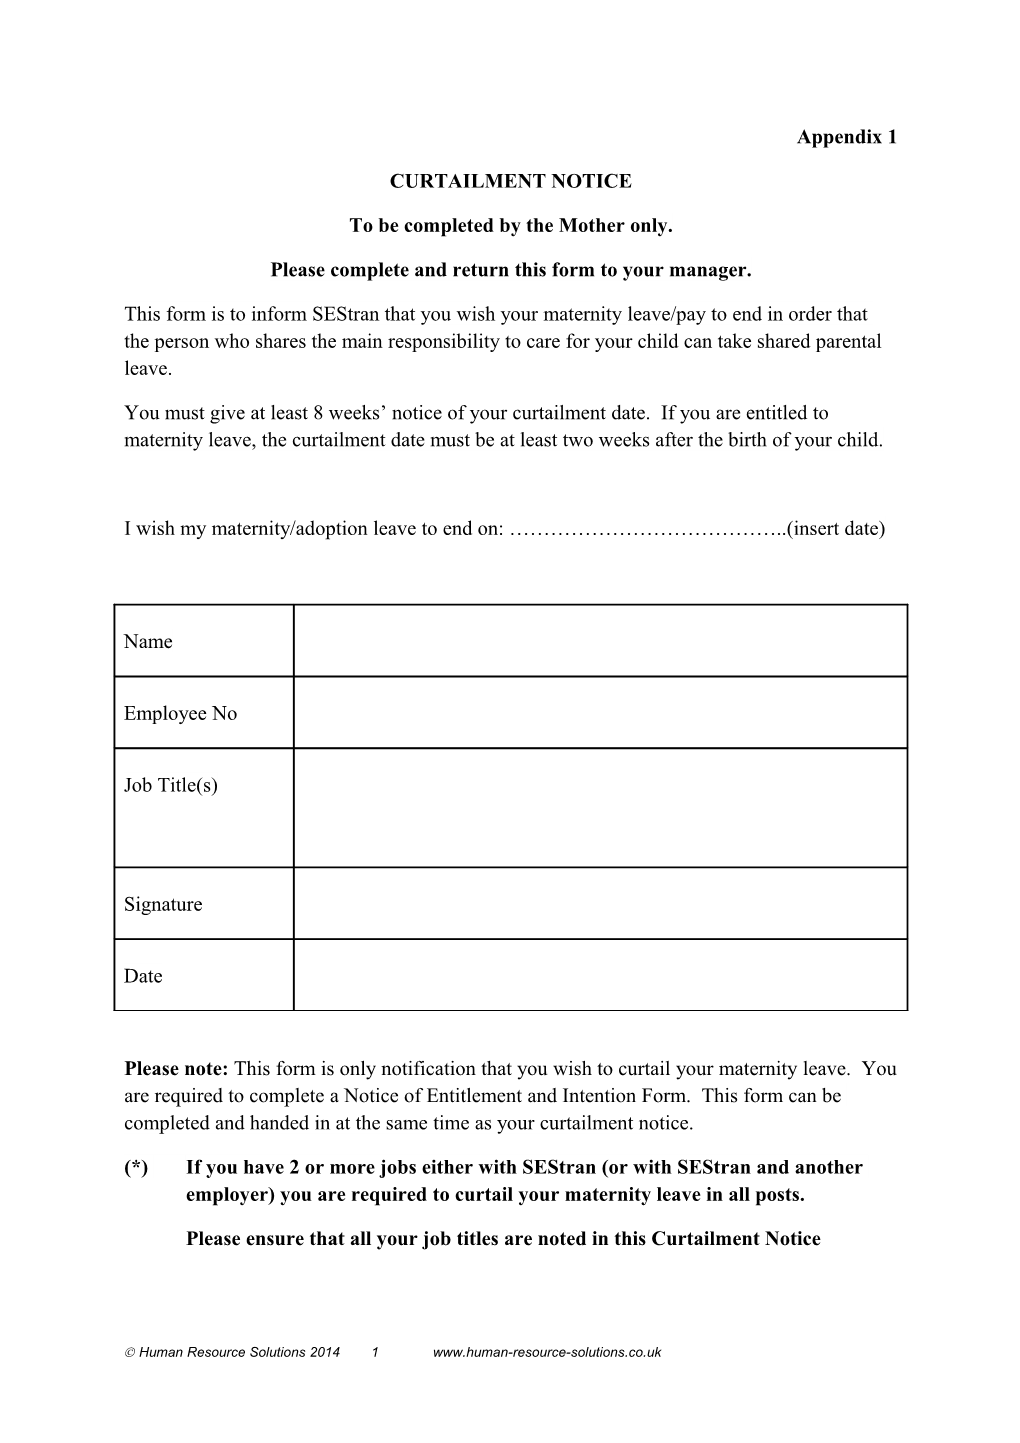 Please Complete and Return This Form to Your Manager